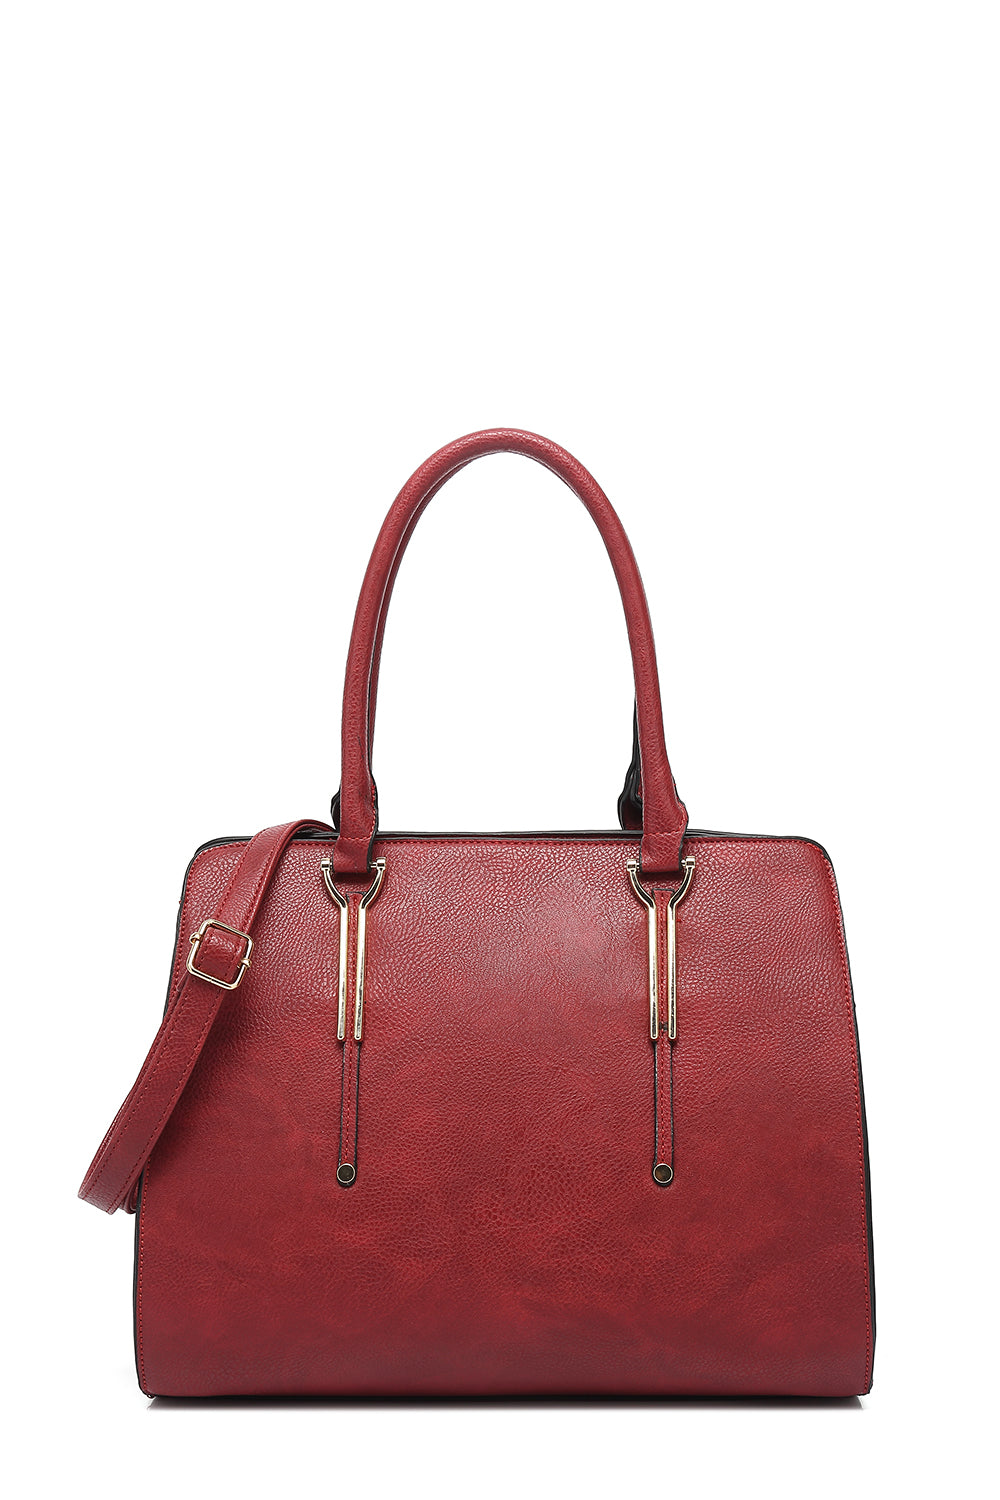 Structured Double Handle Tote